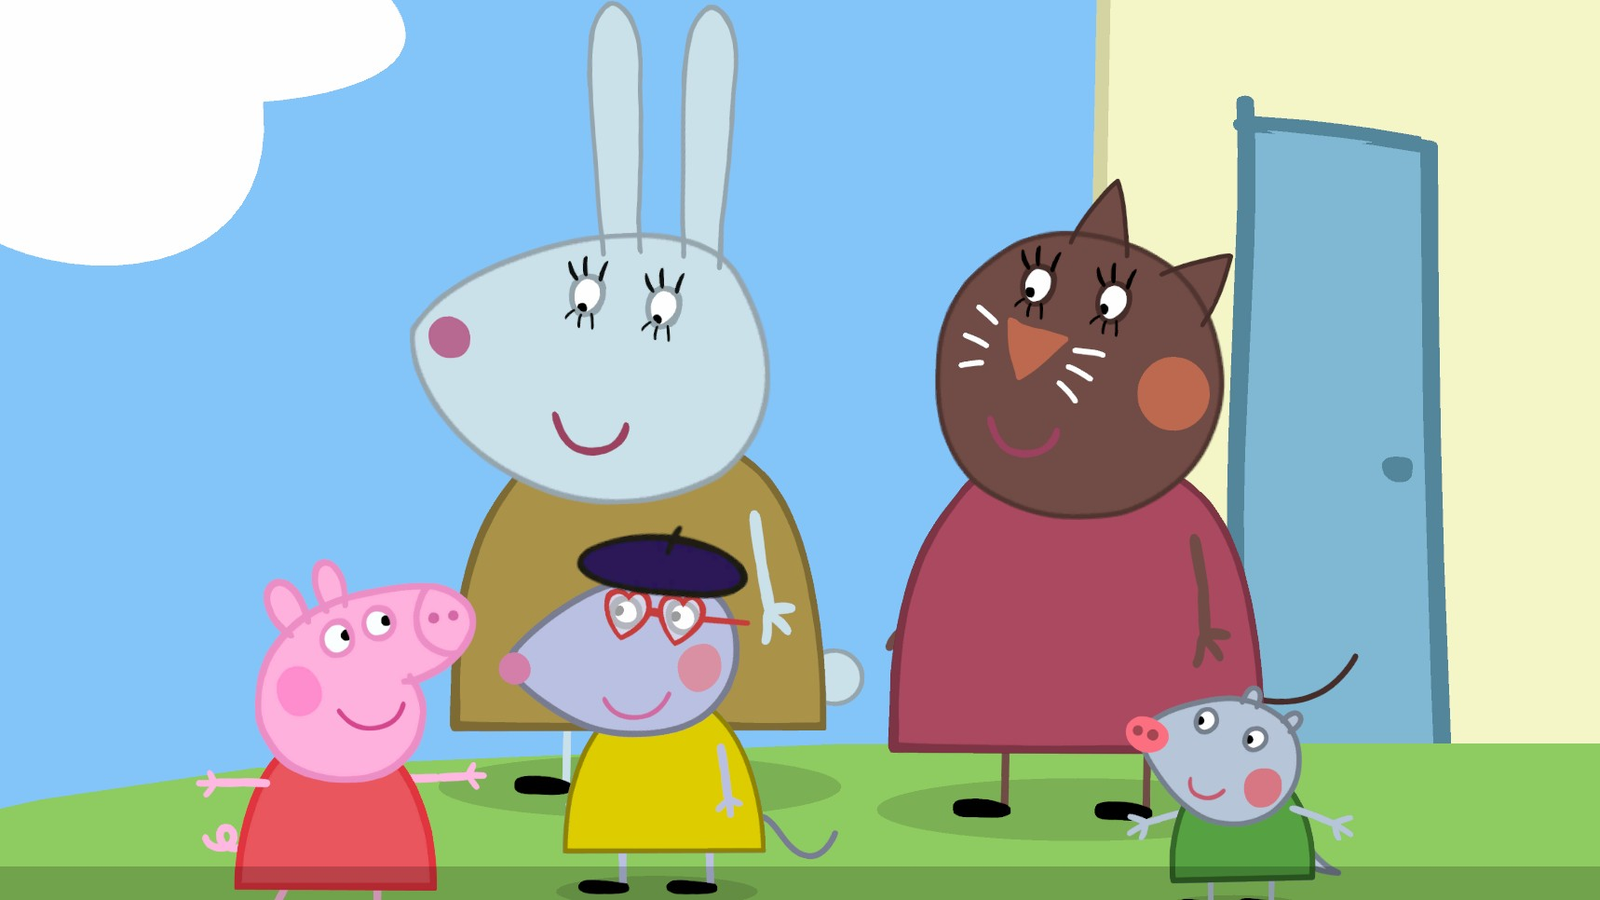 https://assetsio.gnwcdn.com/peppa-pig-family.jpg?width=1600&height=900&fit=crop&quality=100&format=png&enable=upscale&auto=webp